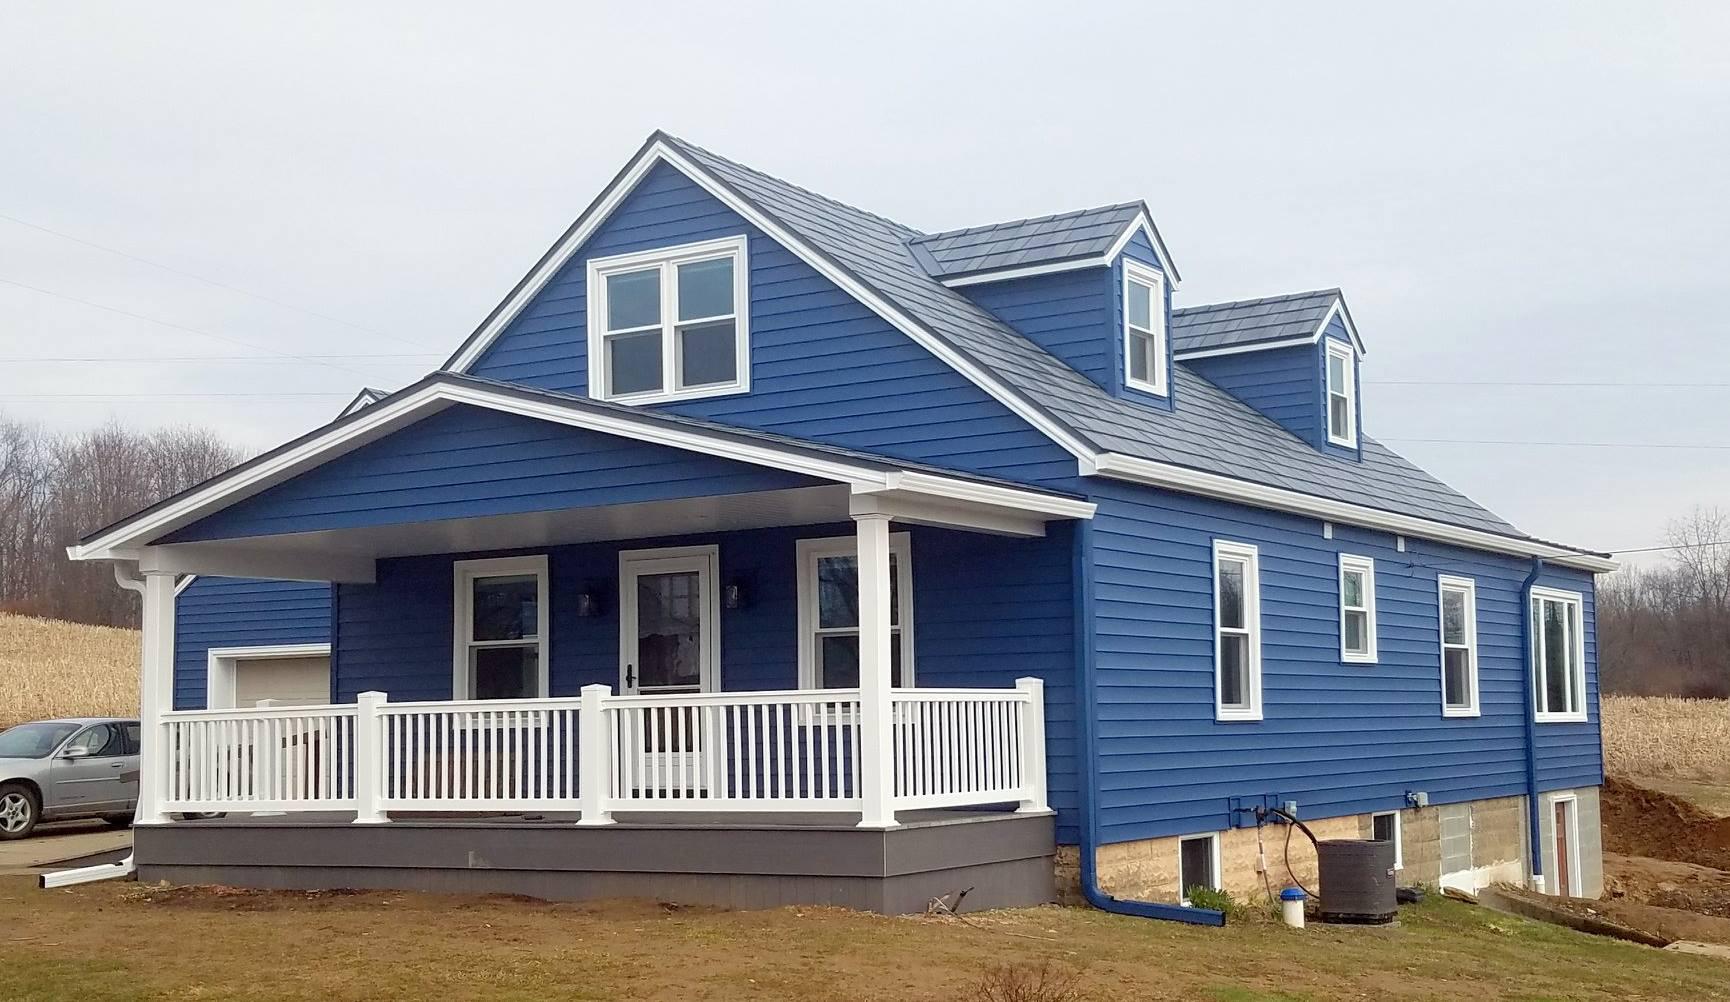 Stunning rural home the is complete with EDCO from top to bottom: Prism Traditional Lap Siding in Sapphire and the award-winning Infiniti roofing in Granite Gray Enhanced